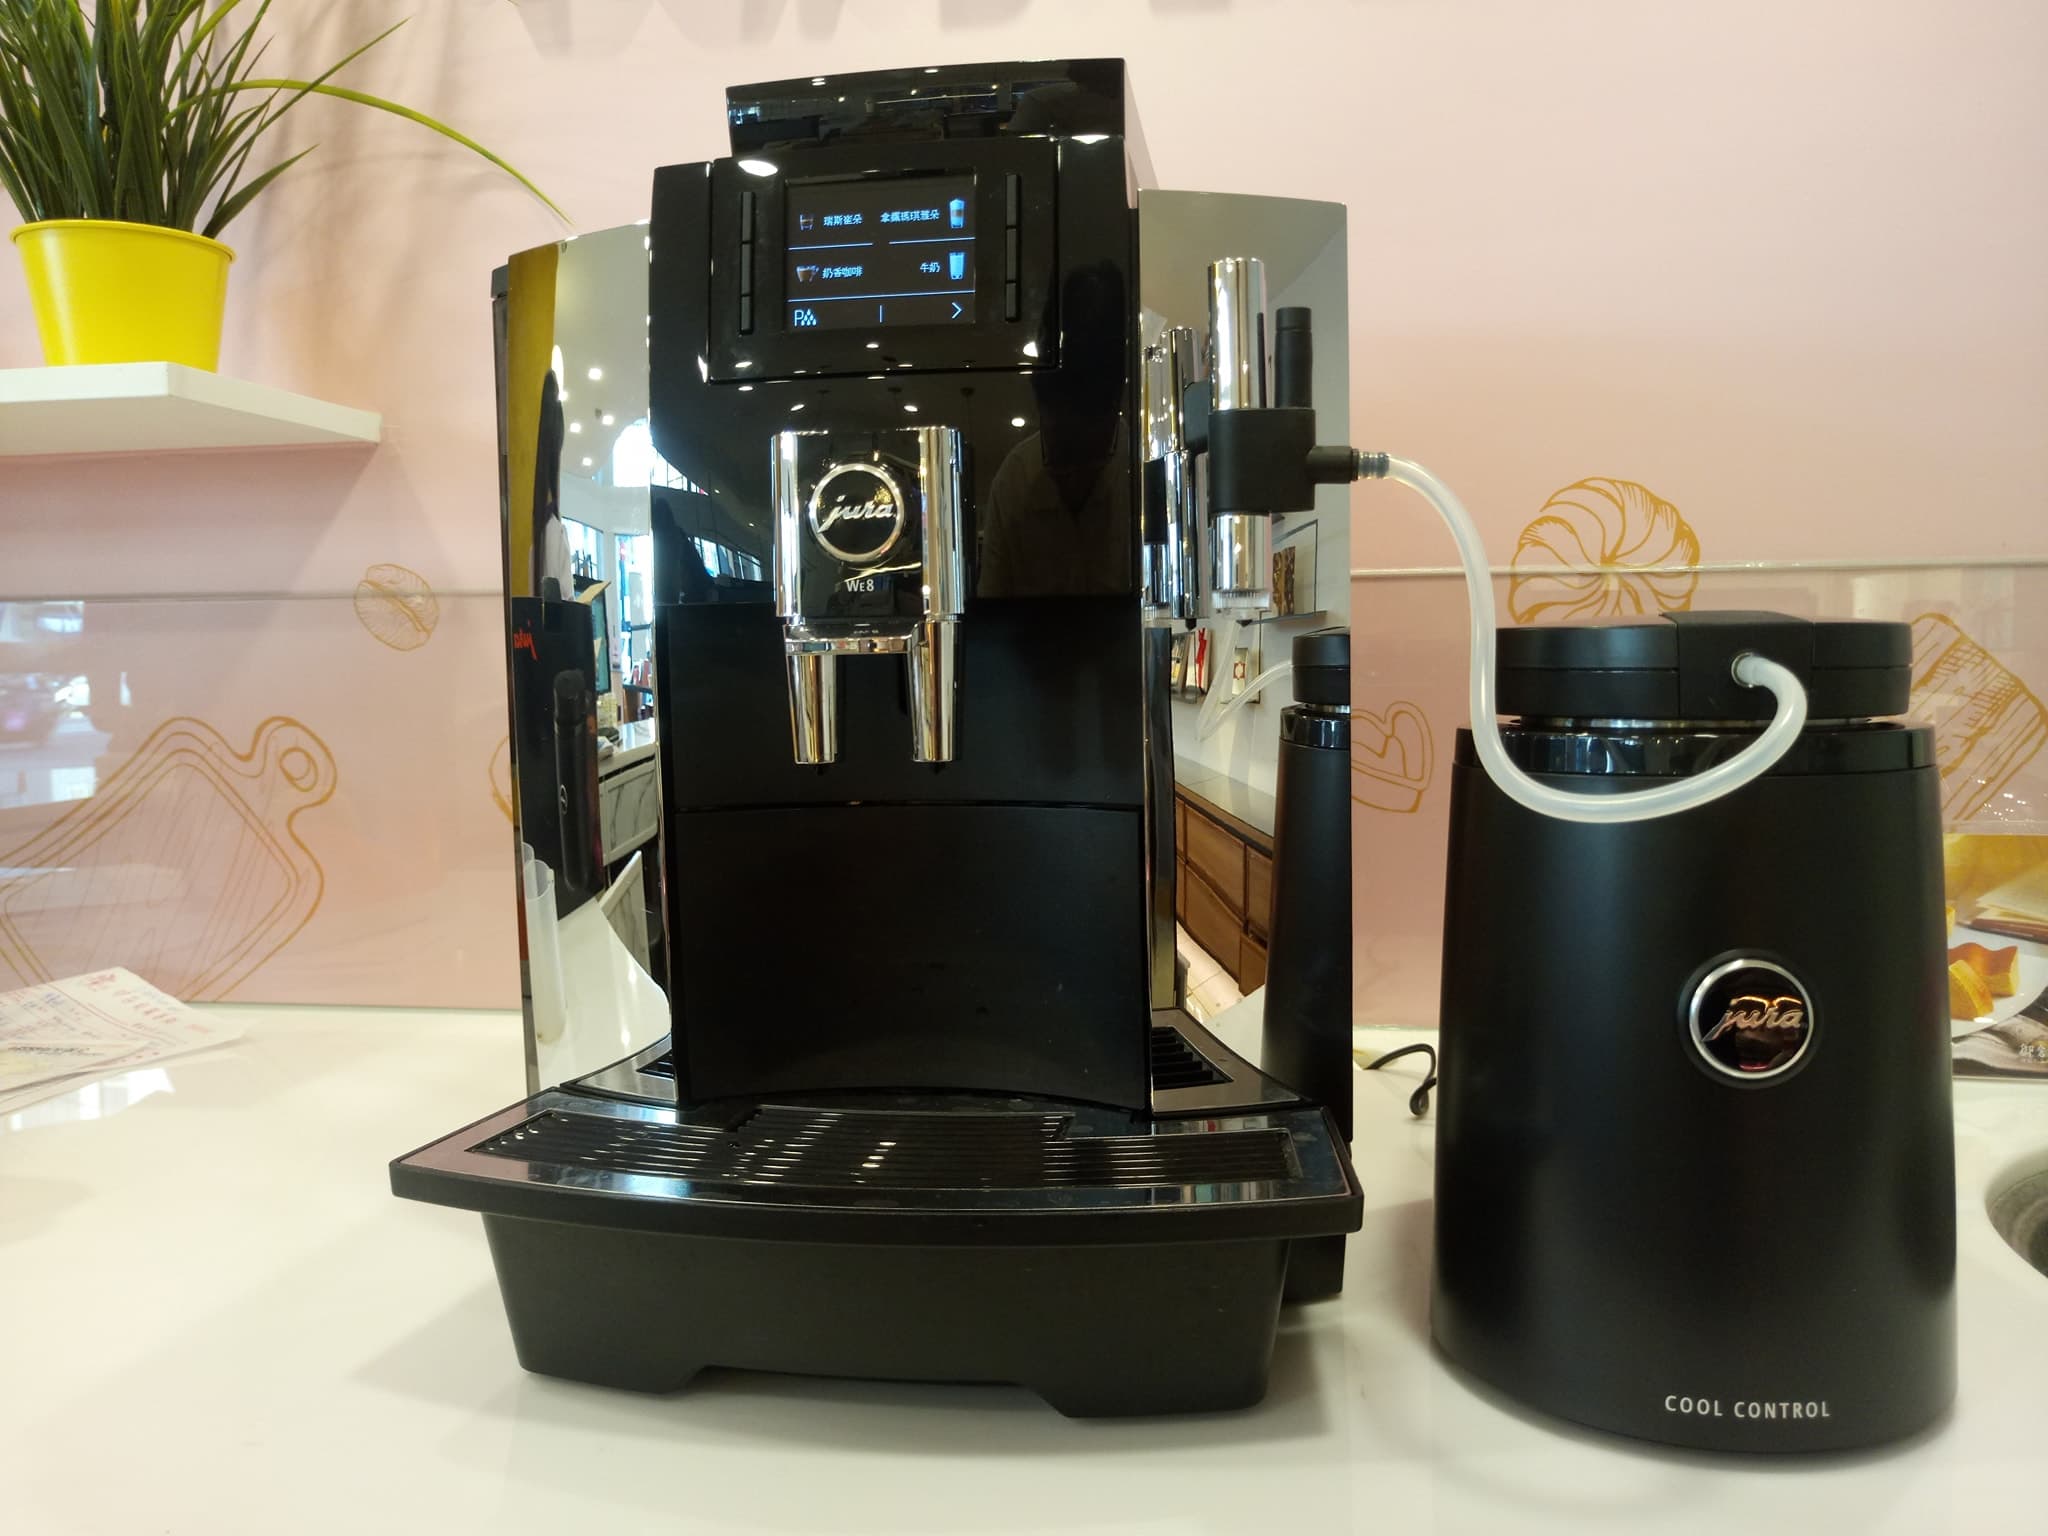 Jura We8 delivers a more robust coffee flavor 